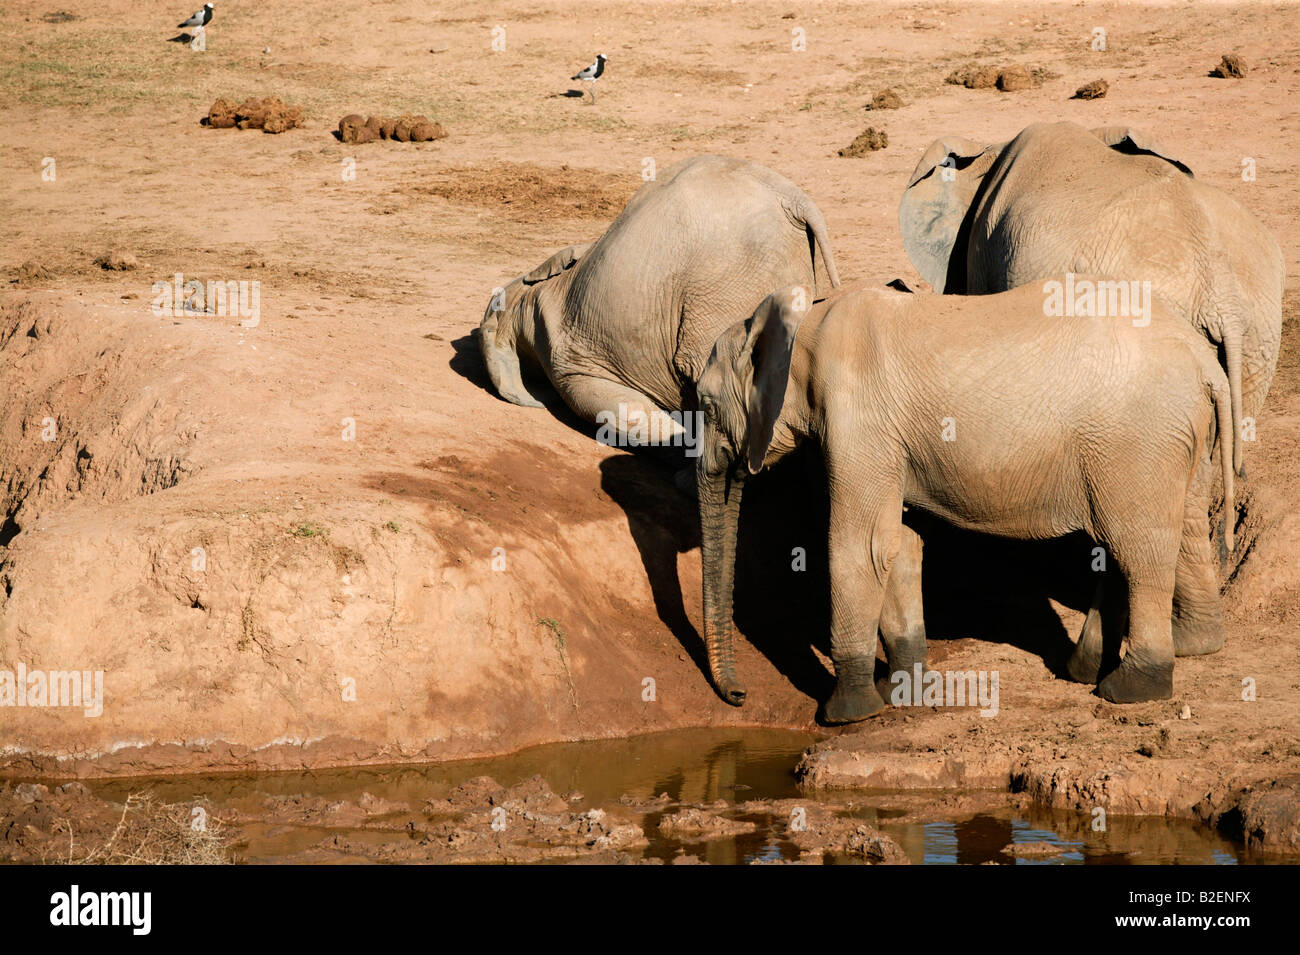 An elephant which has collapsed onto its head as two others stand by unconcerned Stock Photo